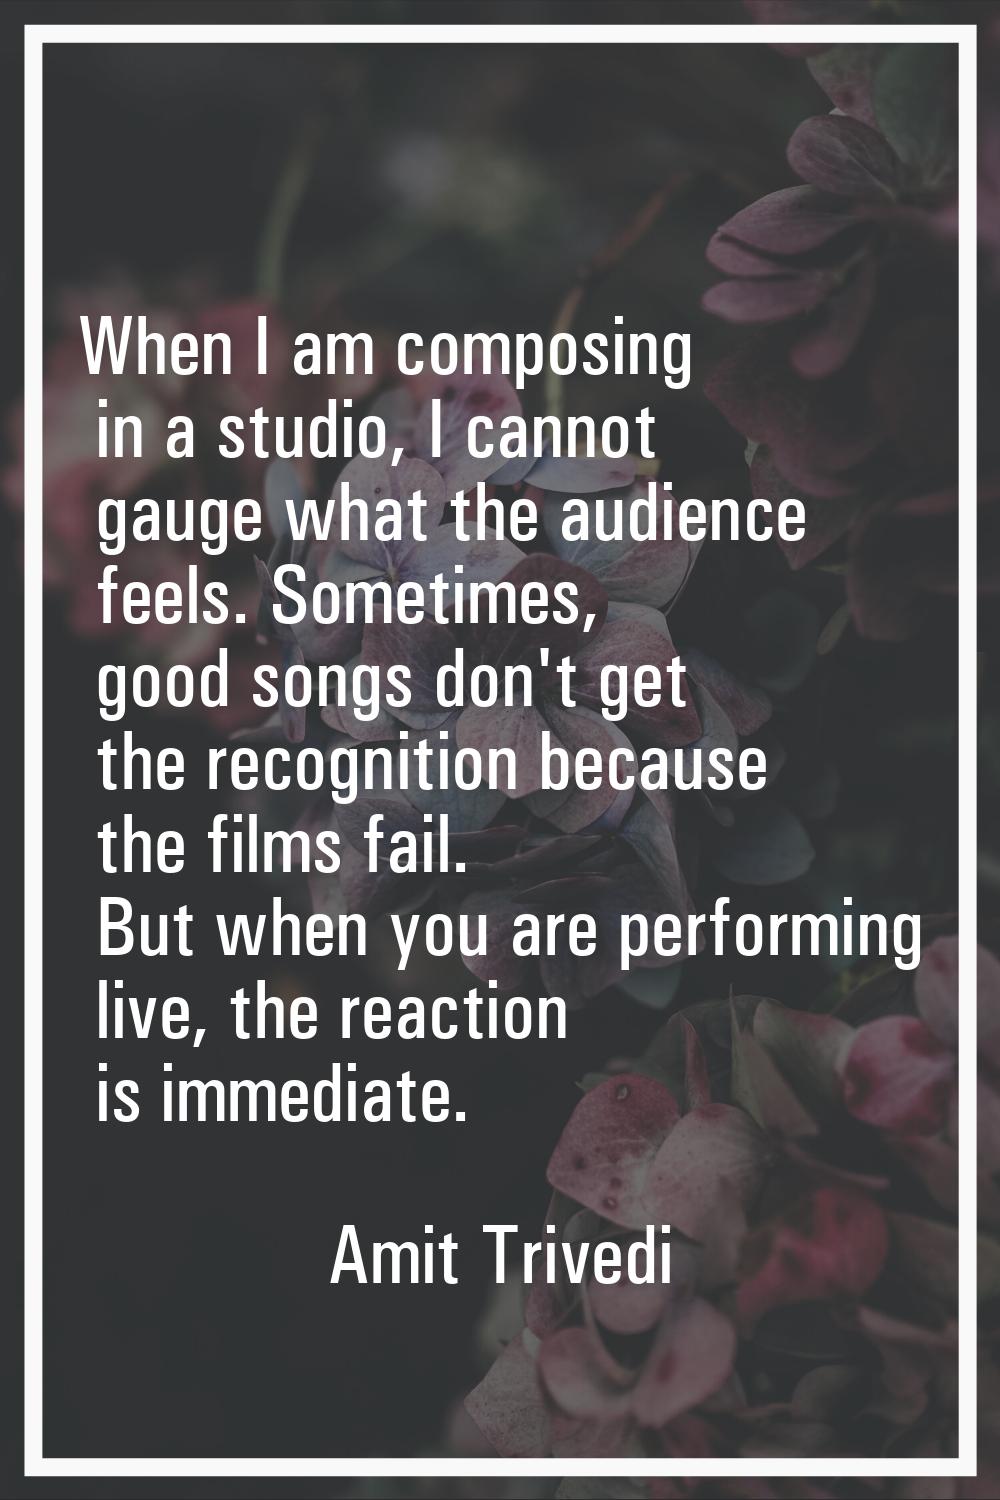 When I am composing in a studio, I cannot gauge what the audience feels. Sometimes, good songs don'